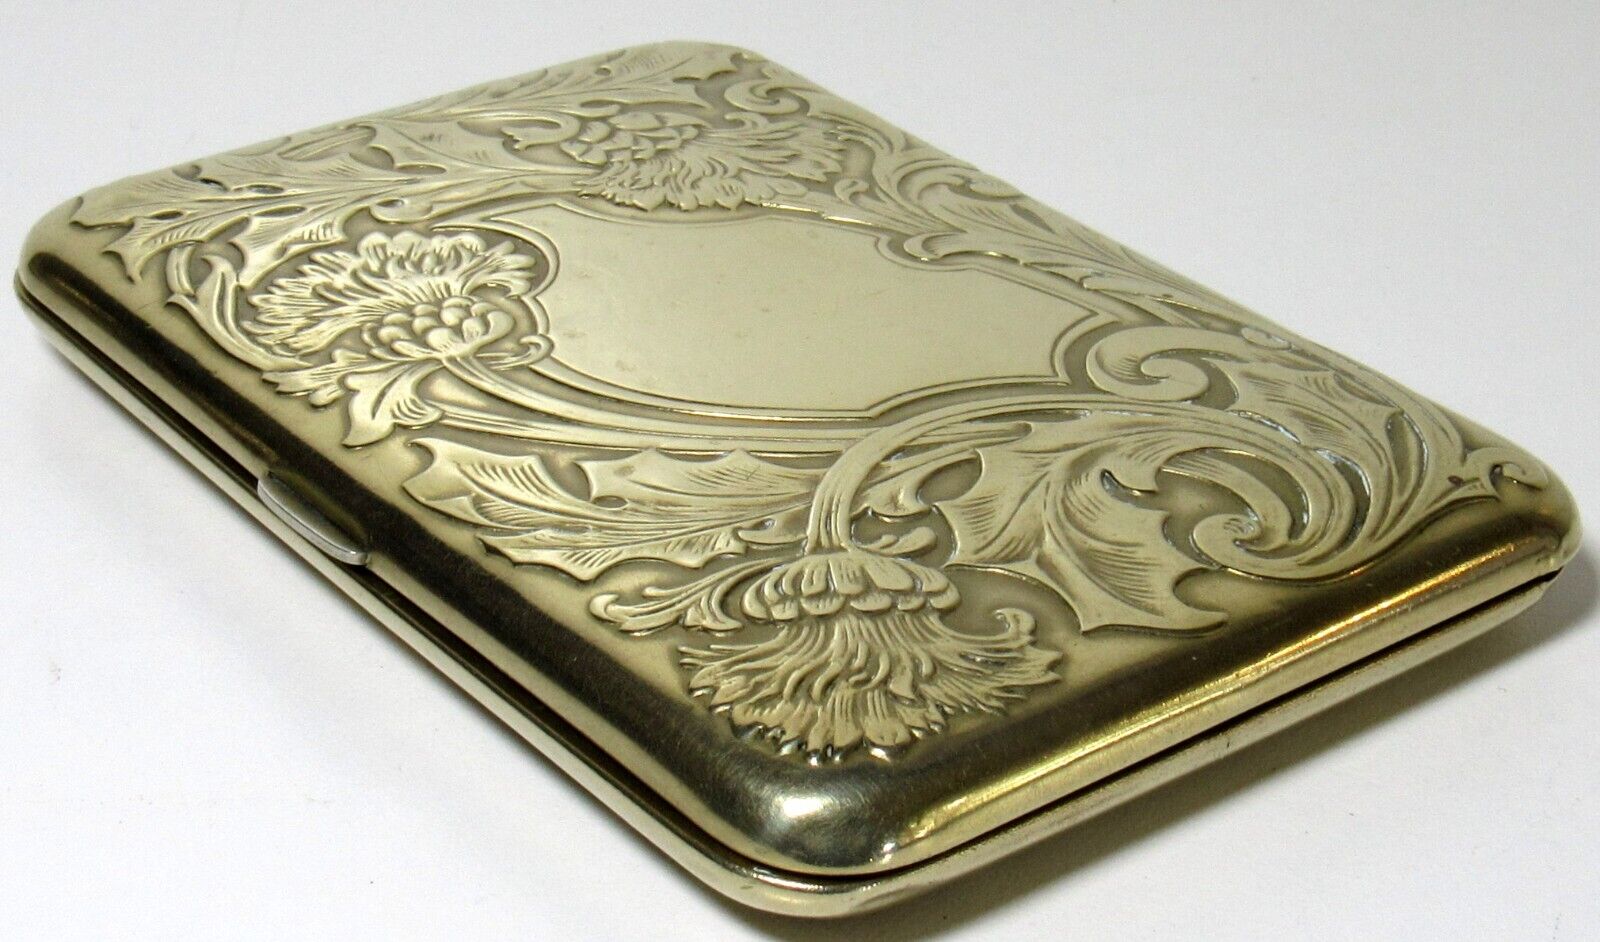 Vintage German Silver Coin Purse / Compact, Floral Pattern, 